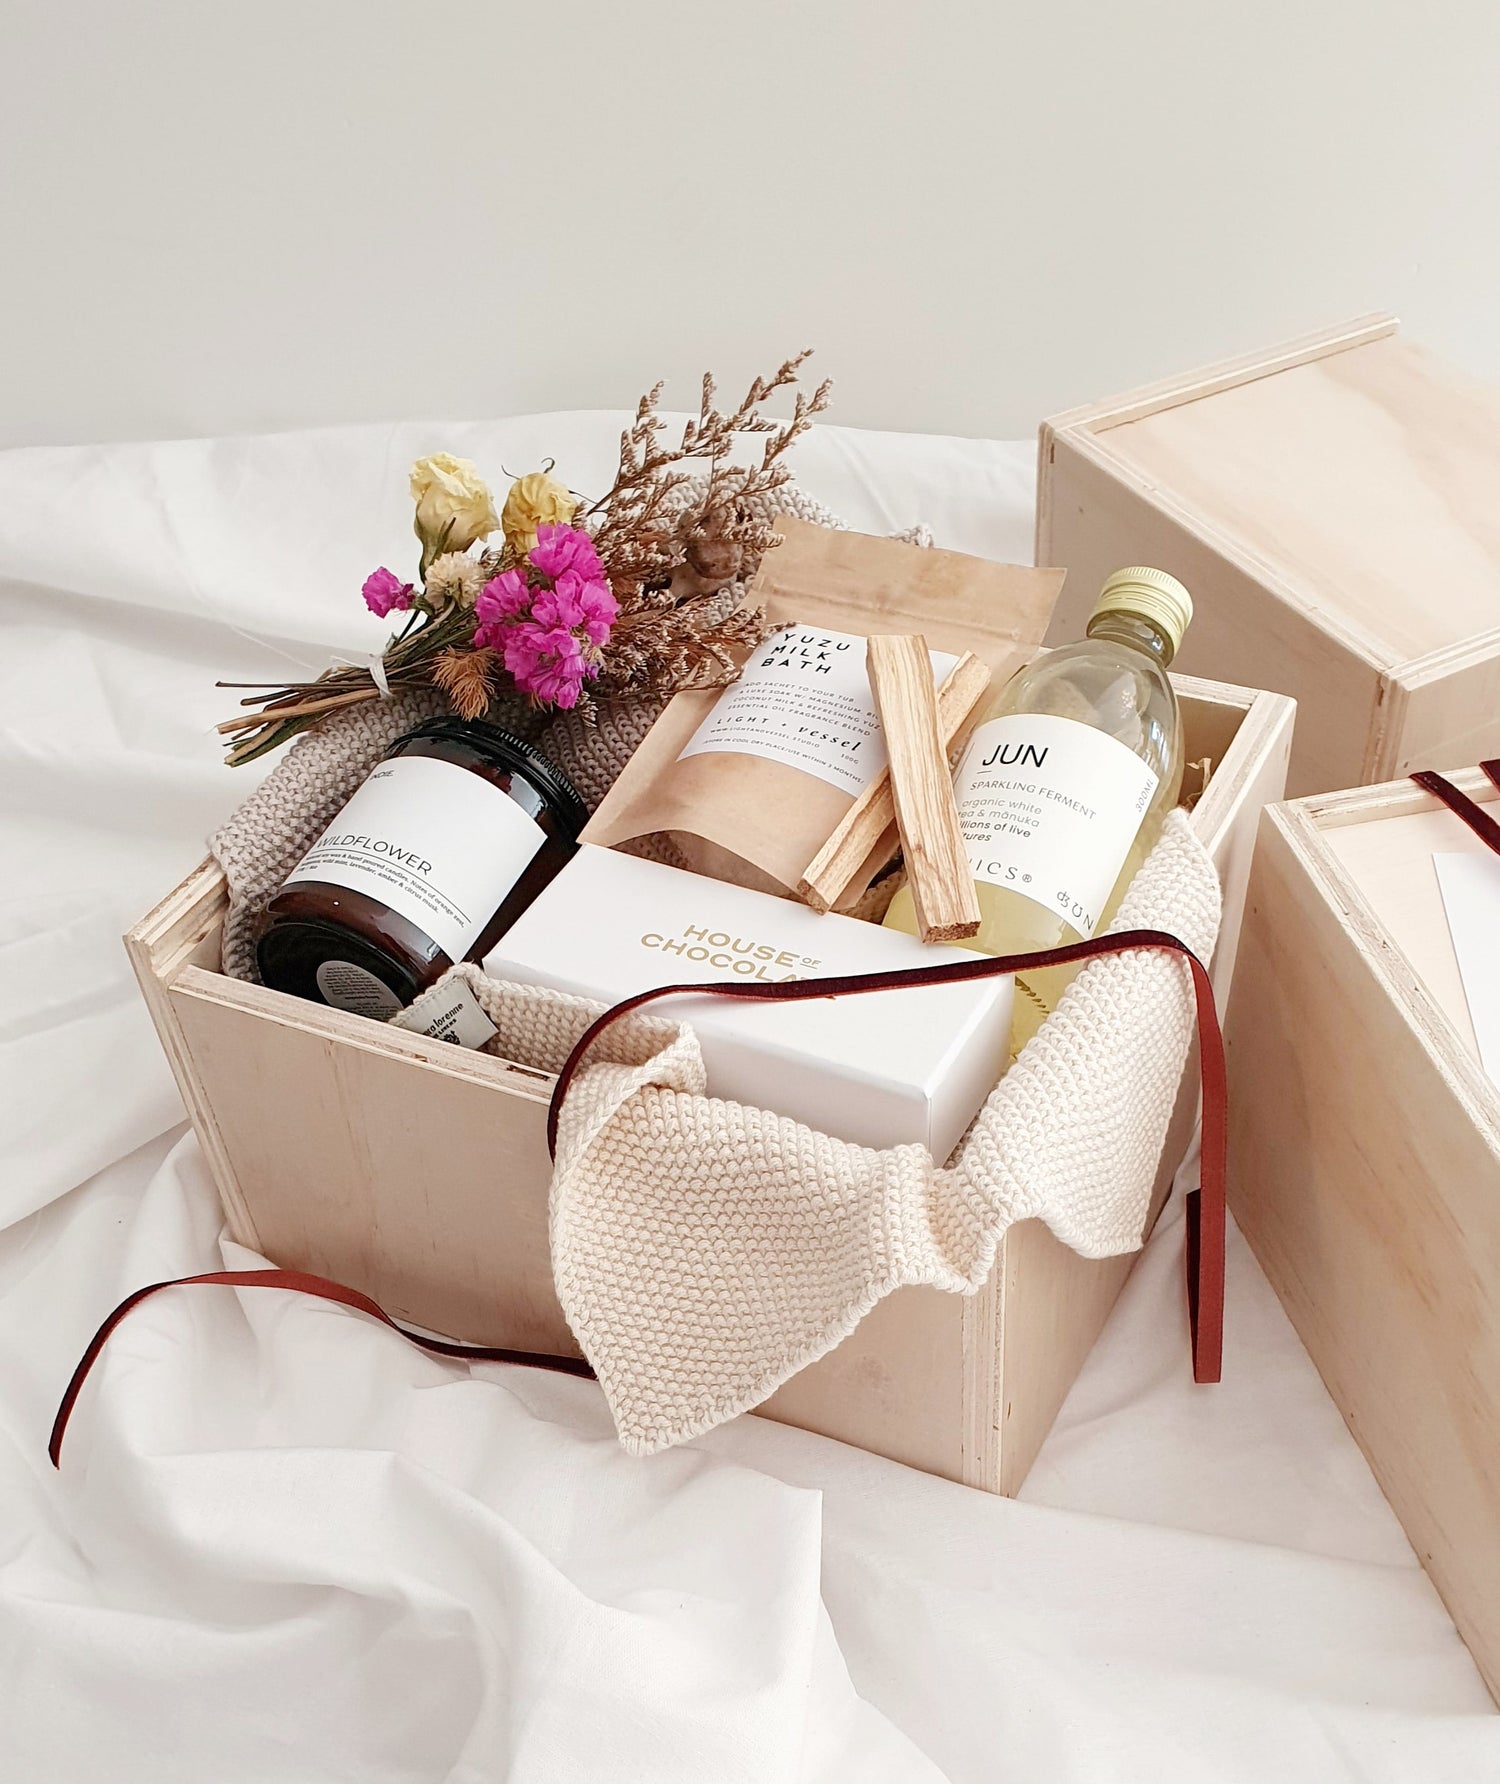 Gift boxes and baskets nz by bundle and blooms. Gifts for women nz